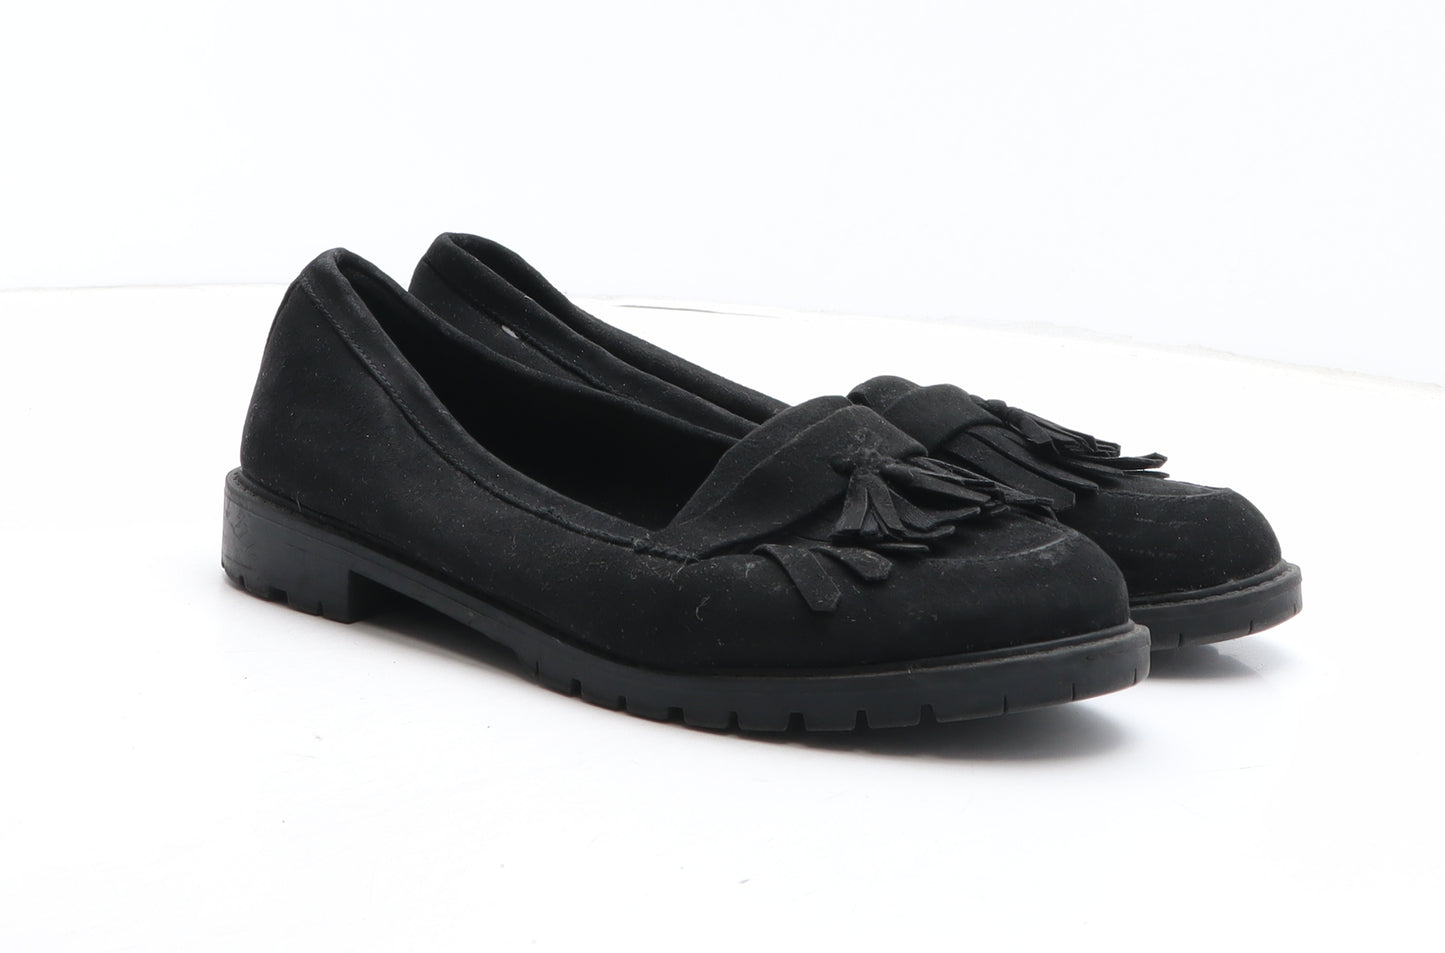 New Look Womens Black Fabric Loafer Casual UK